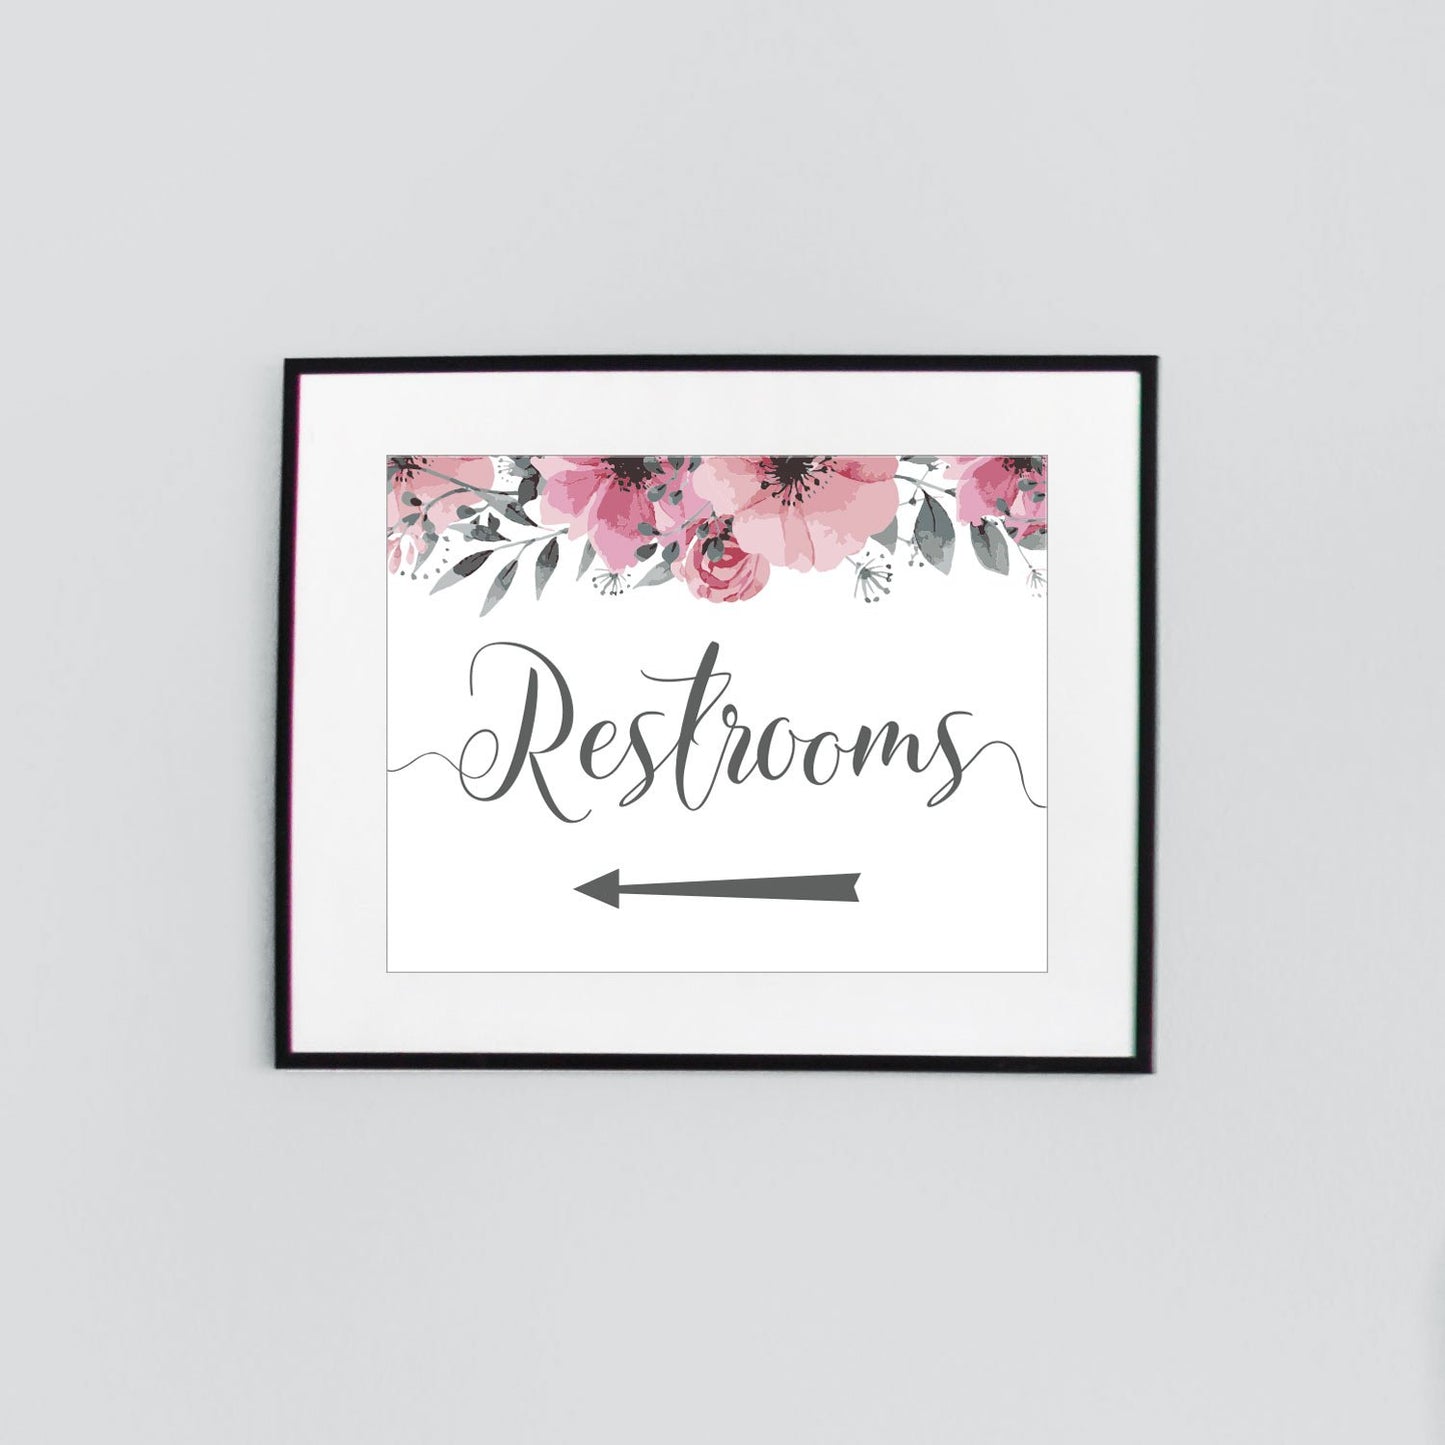 framed wedding restrooms sign with left arrow to point guests in the right direction